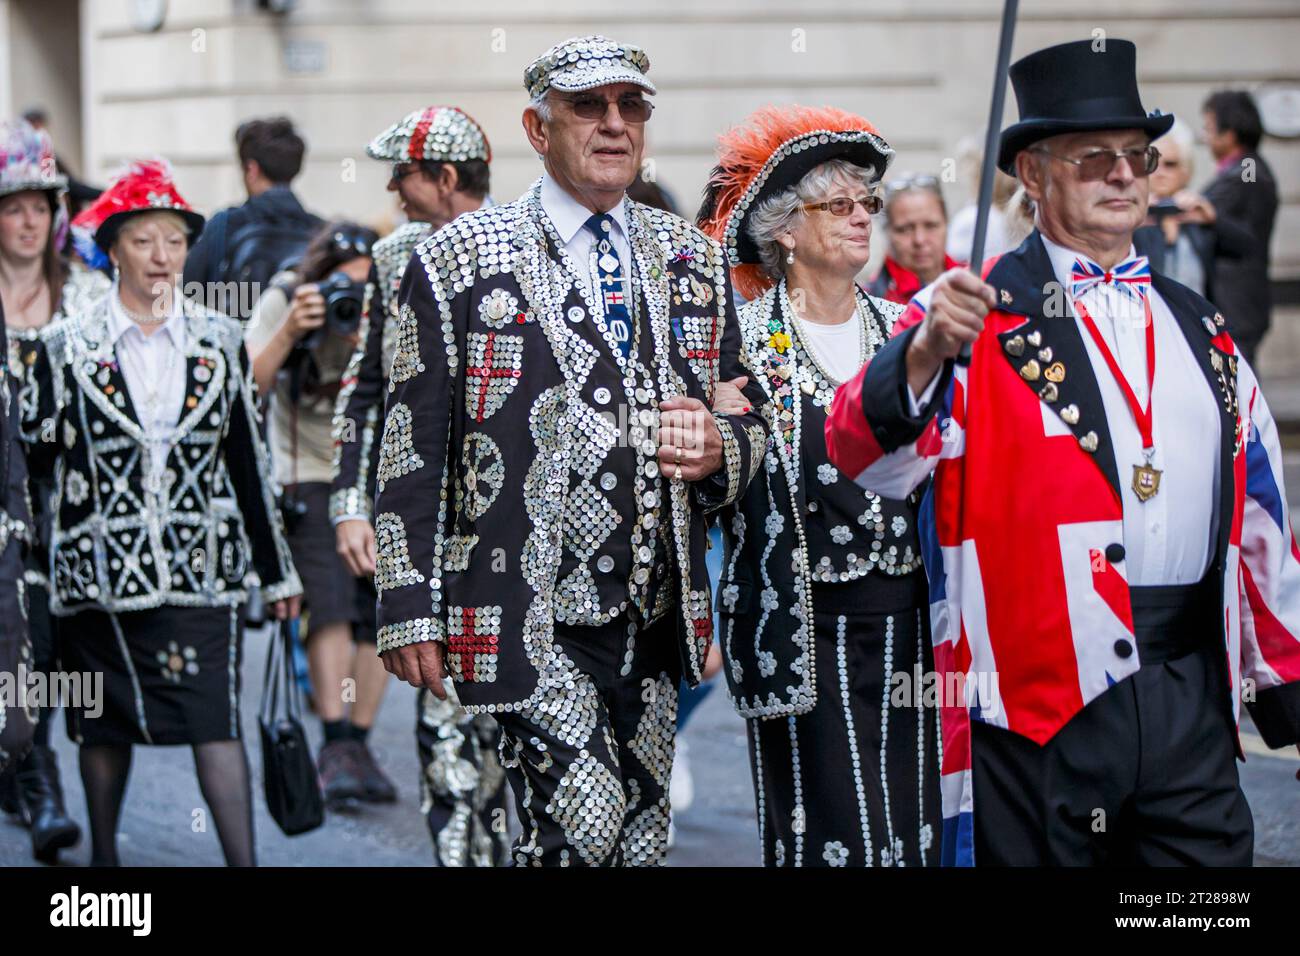 Pearly Kings and Queens at the Pearly Kings and Queens Harvest Festival at Guildhall Yard, London, England. Stock Photo